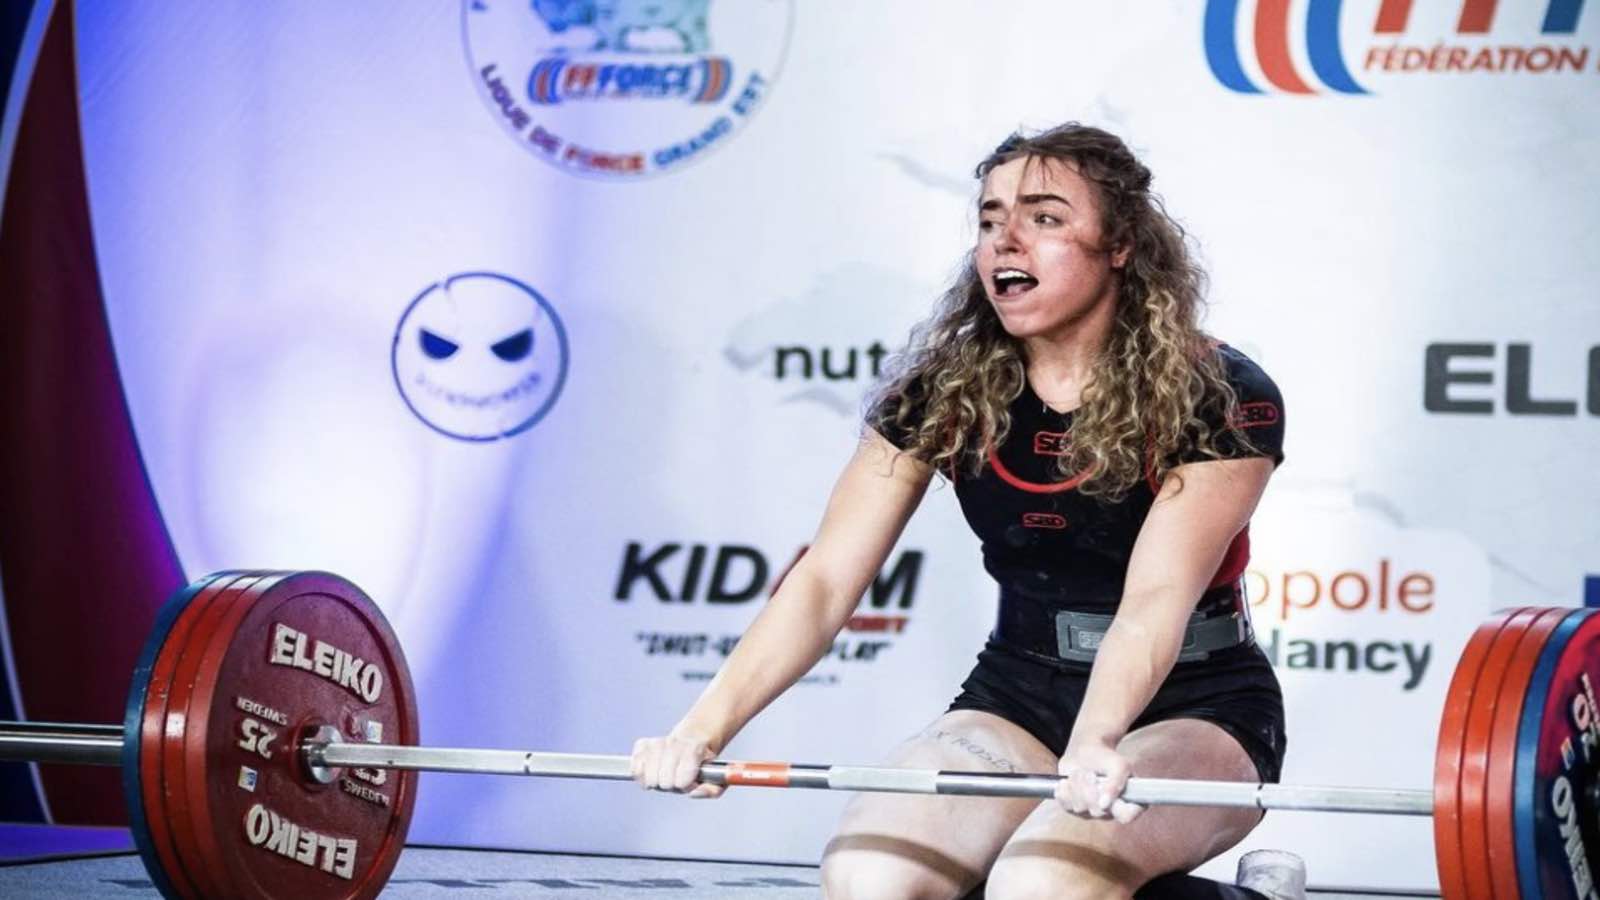 powerlifter-samantha-eugenie-(69kg)-breaks-two-ipf-world-records-at-2023-french-junior-nationals-–-breaking-muscle